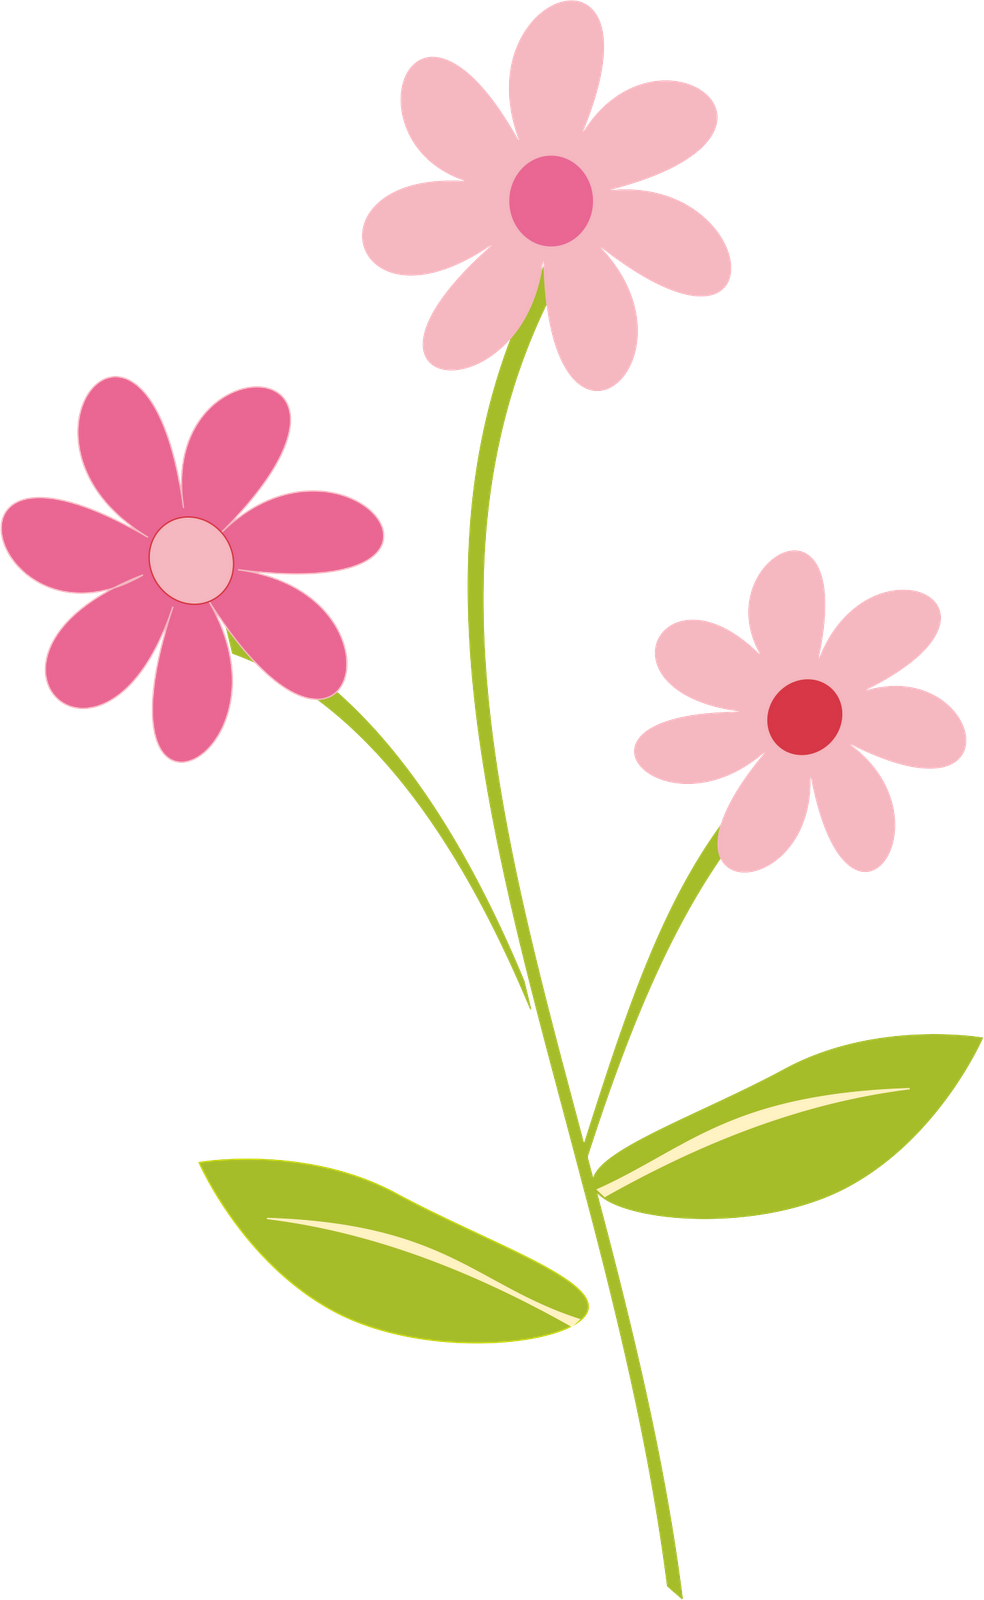 Free Flowery Border Cliparts, Download Free Flowery Border Cliparts png